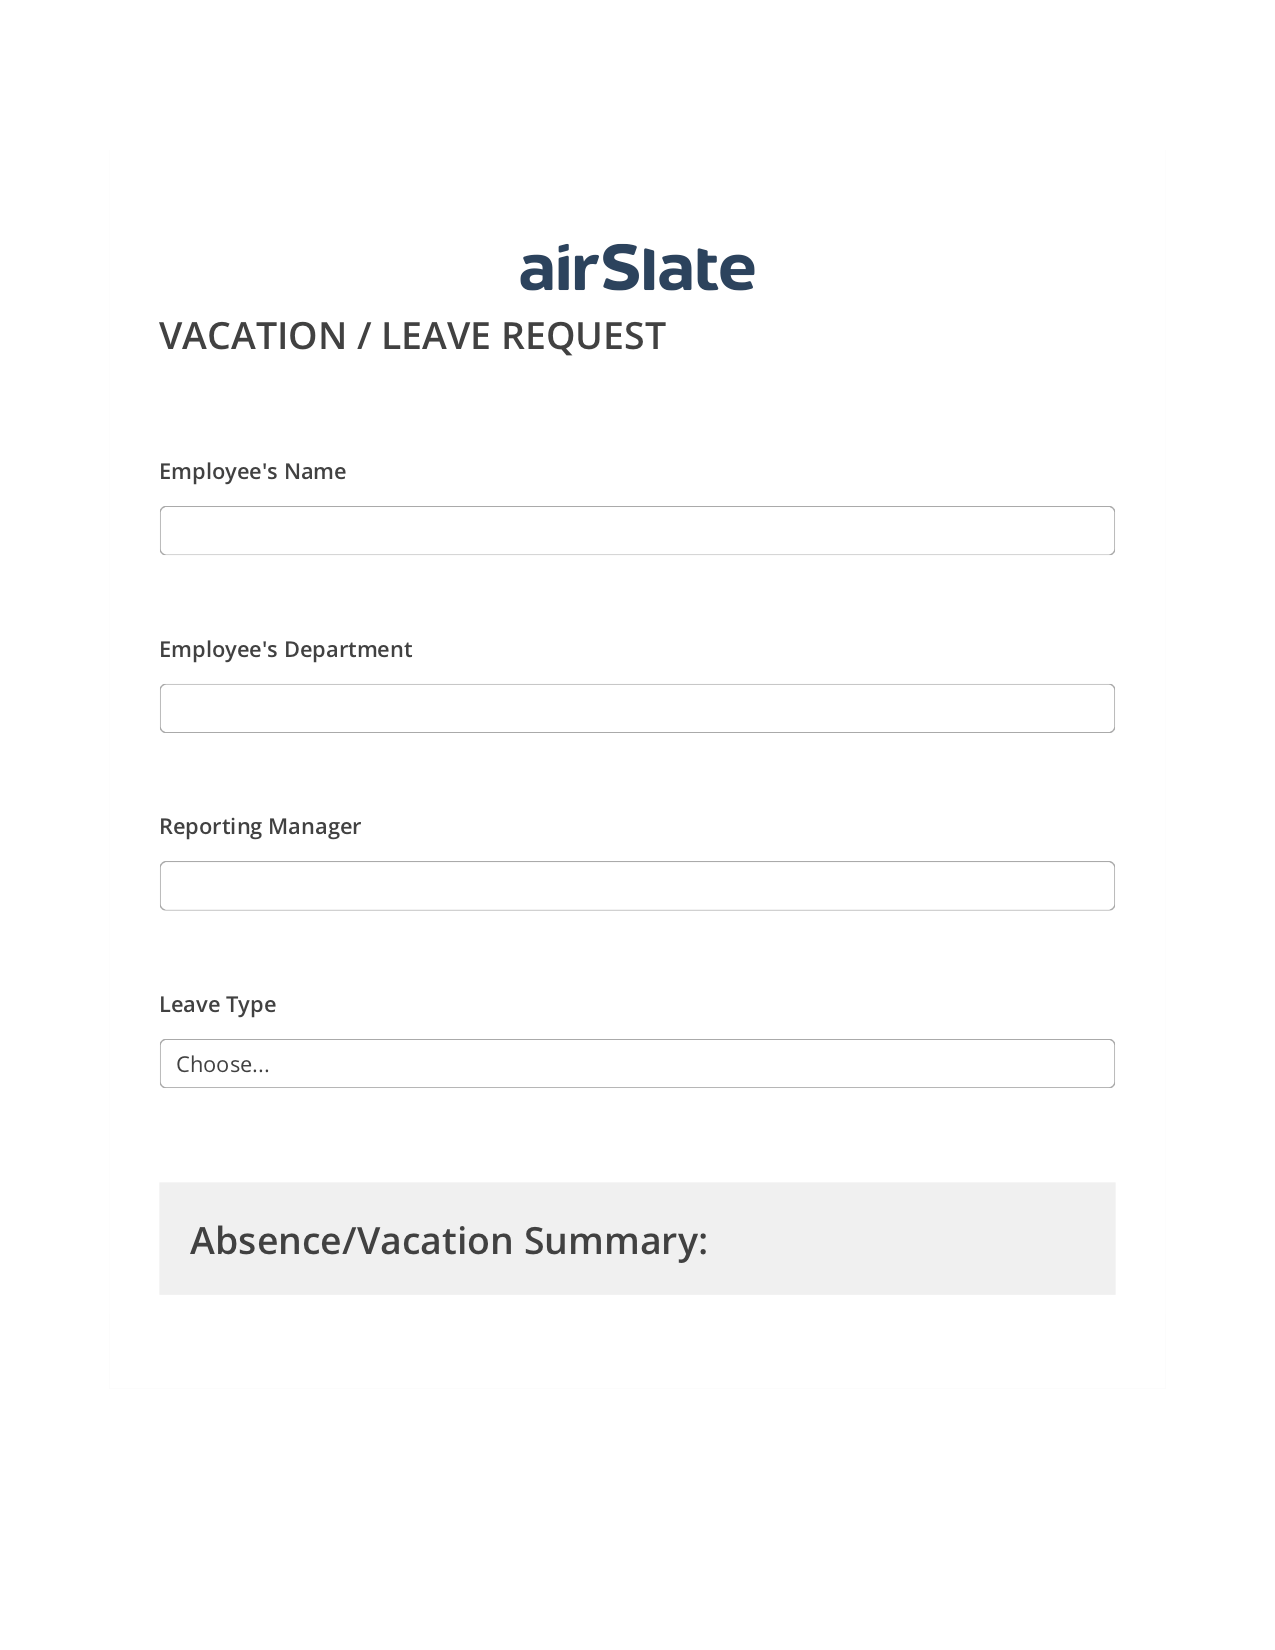 Vacation/Leave Request Workflow Pre-fill from Google Sheets Bot, Webhook Bot, Archive to SharePoint Folder Bot